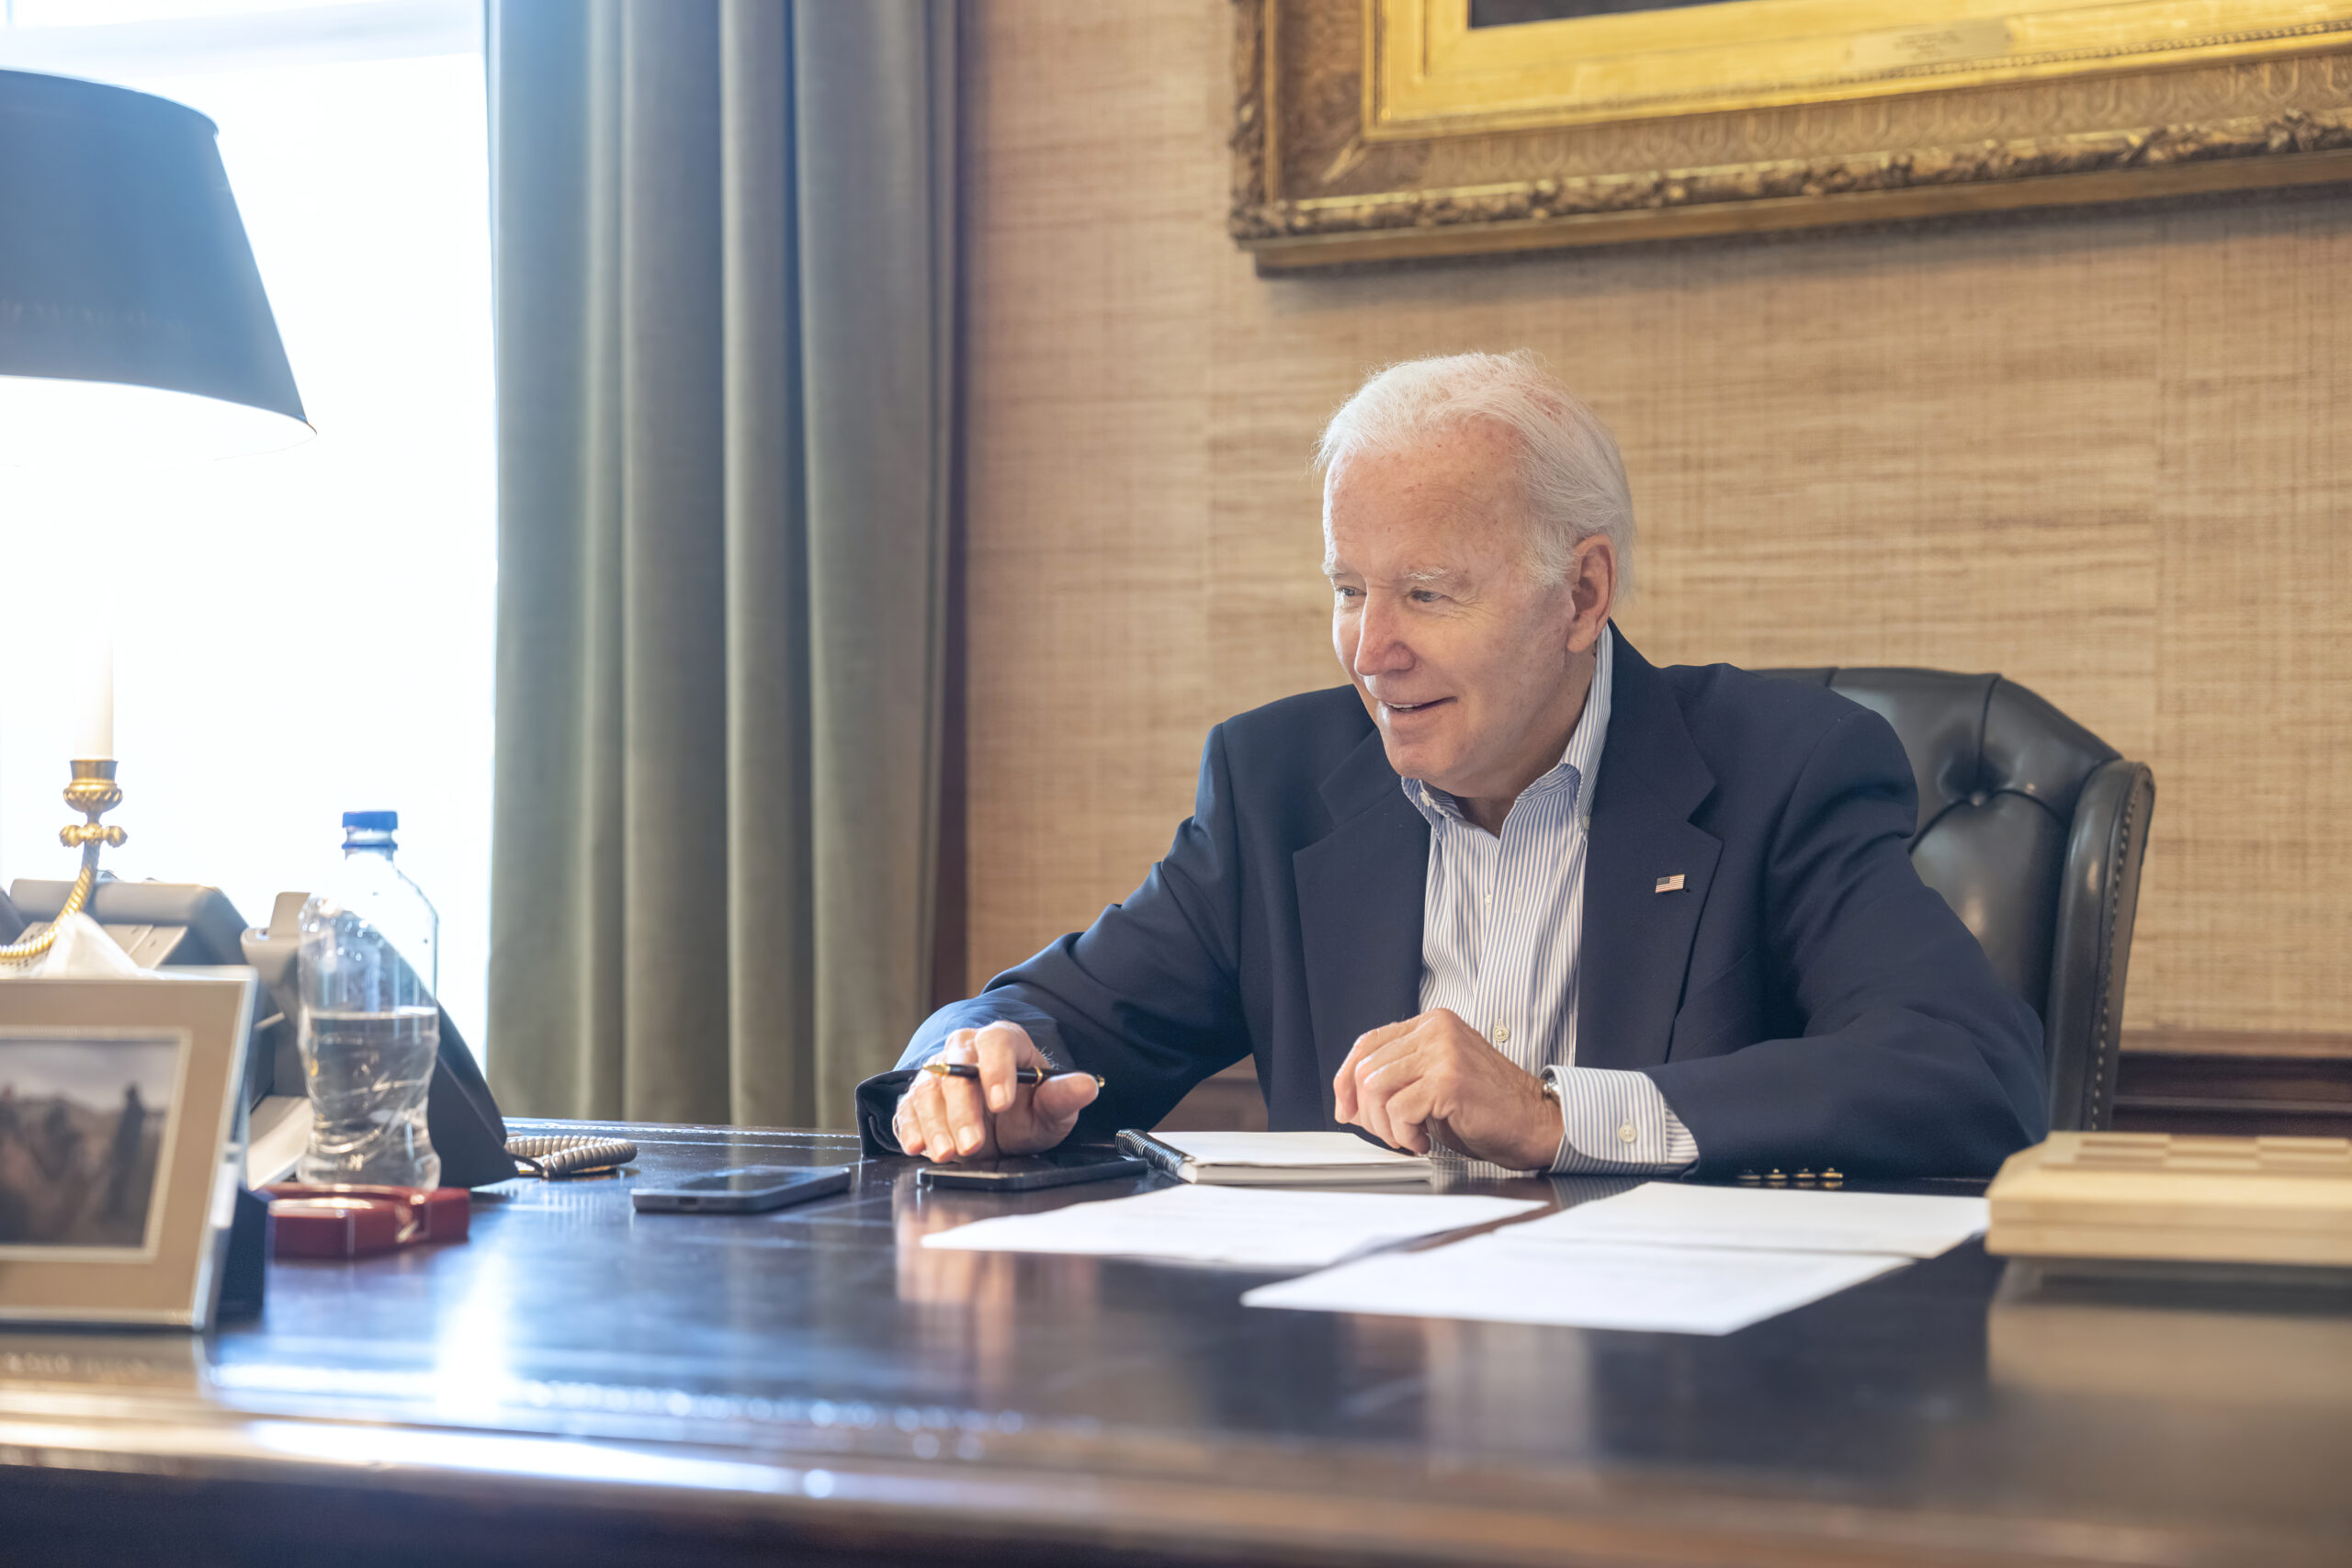 In this image provided by the White House, President Joe Biden speaks with Sen. Bob Casey, D-Pa., on the phone from the Treaty Room in the residence of the White House Thursday, July 21, 2022, in Washington. Biden says he's "doing great" after testing positive for COVID-19. The White House said Biden is experiencing "very mild symptoms," including a stuffy nose, fatigue and cough. He's taking Paxlovid, an antiviral drug designed to reduce the severity of the disease. (Adam Schultz/The White House via AP)